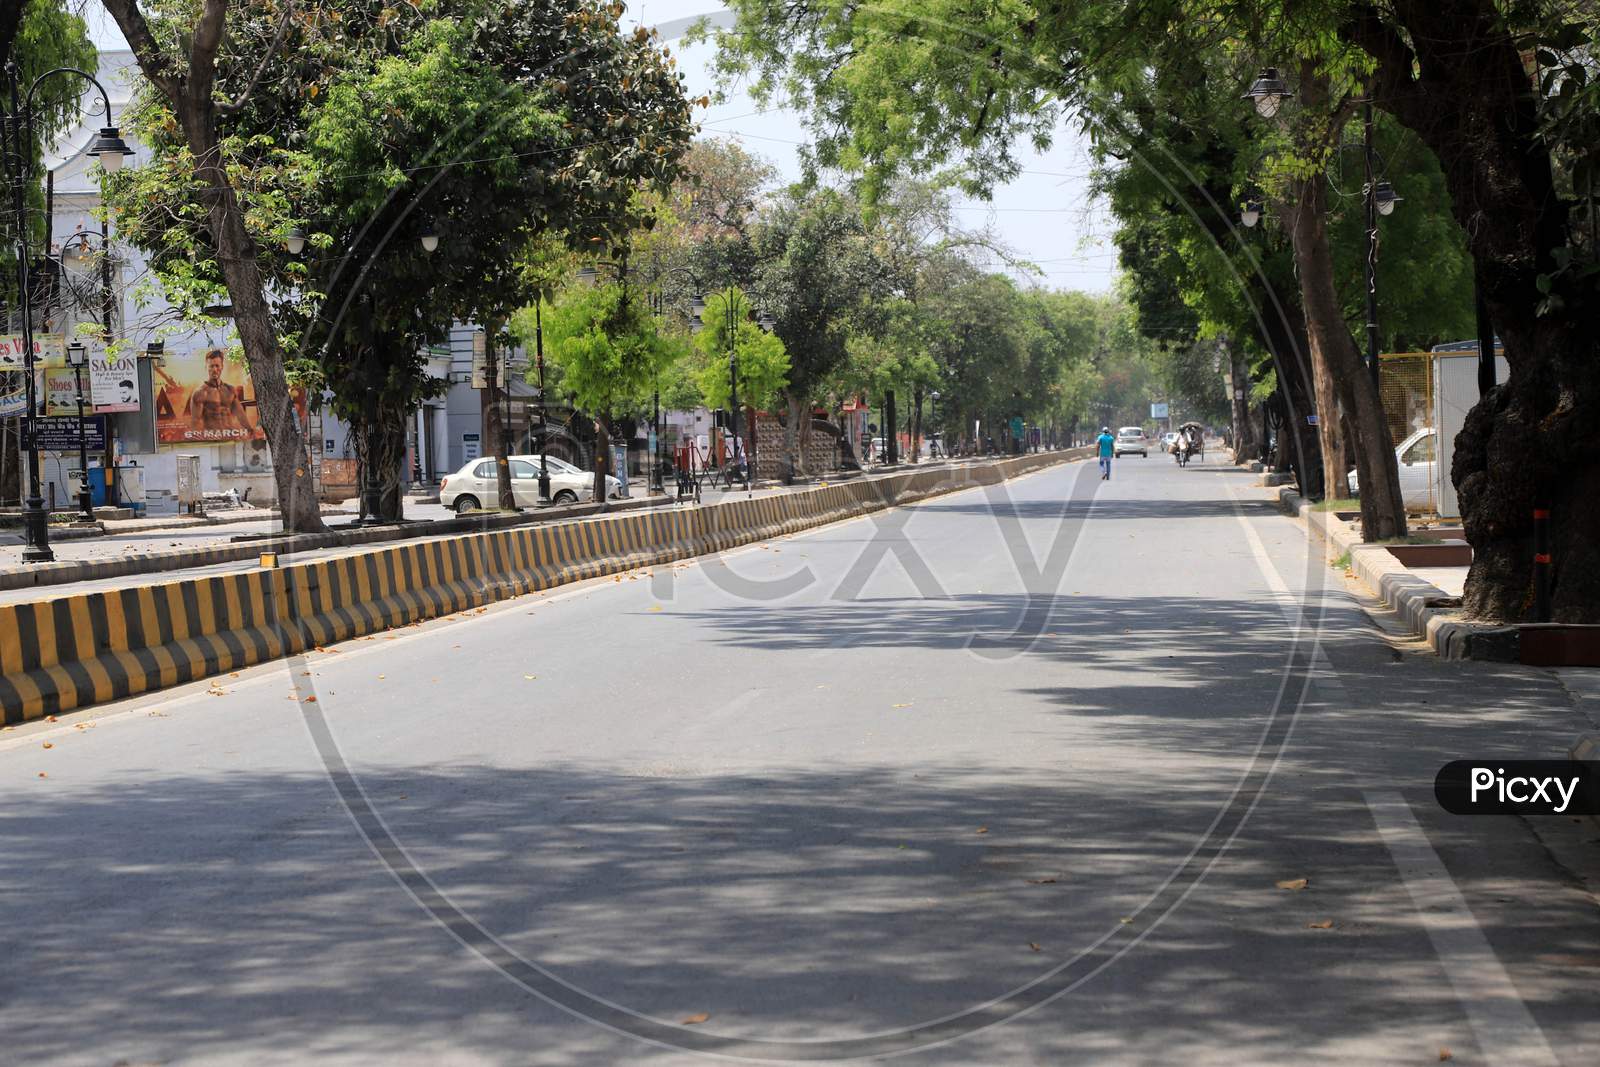 A View Of Main Market Empty Road During Nationwide Lockdown In Wake Of Coronavirus or covid-19 Pandemic In Prayagraj, March 13, 2020